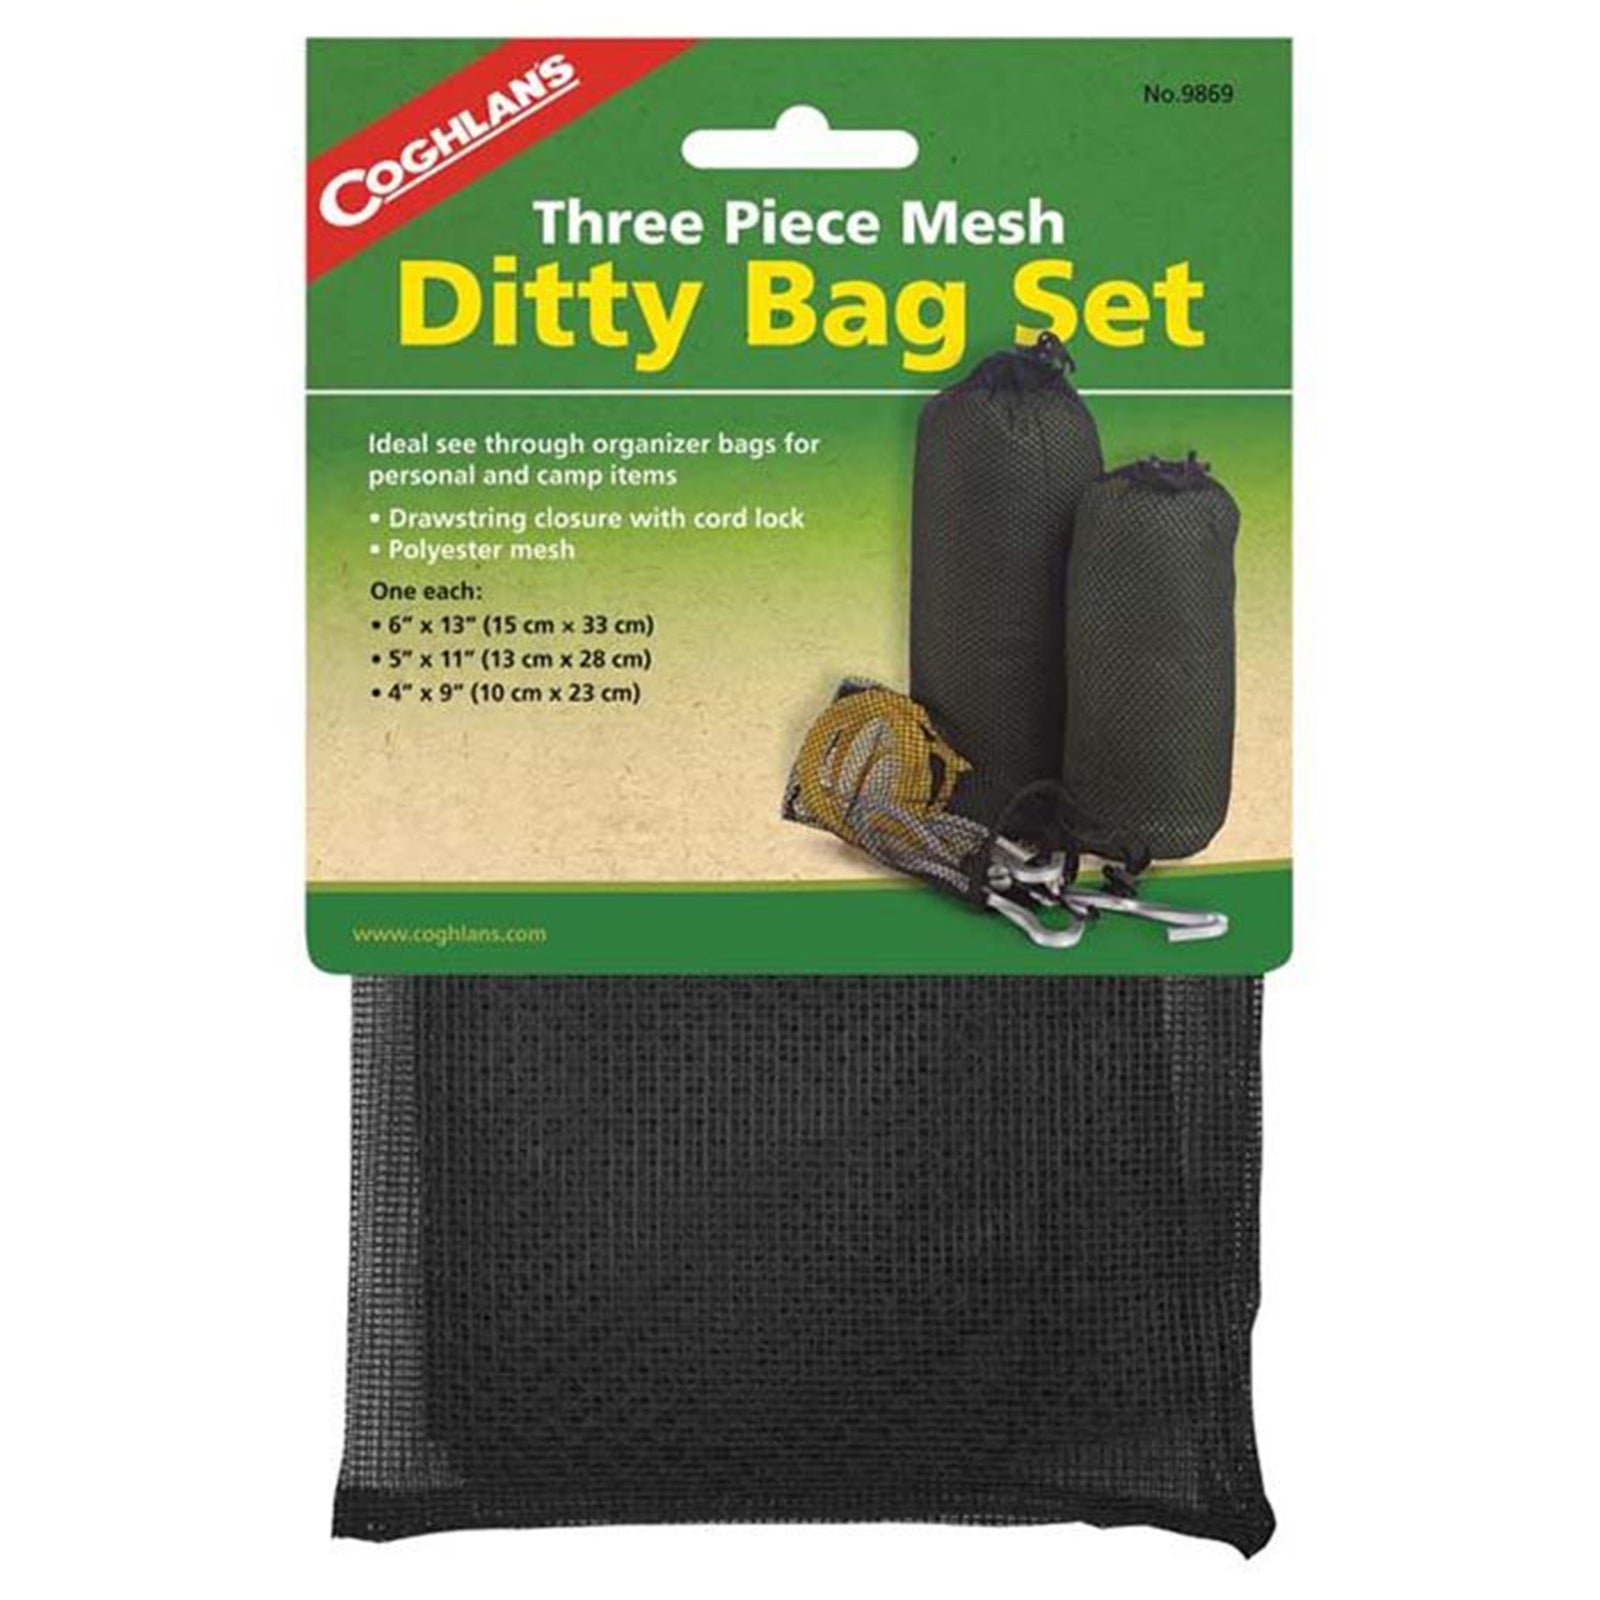 pictured is the packaging of the ditty bag set showing three bags with stuff in them